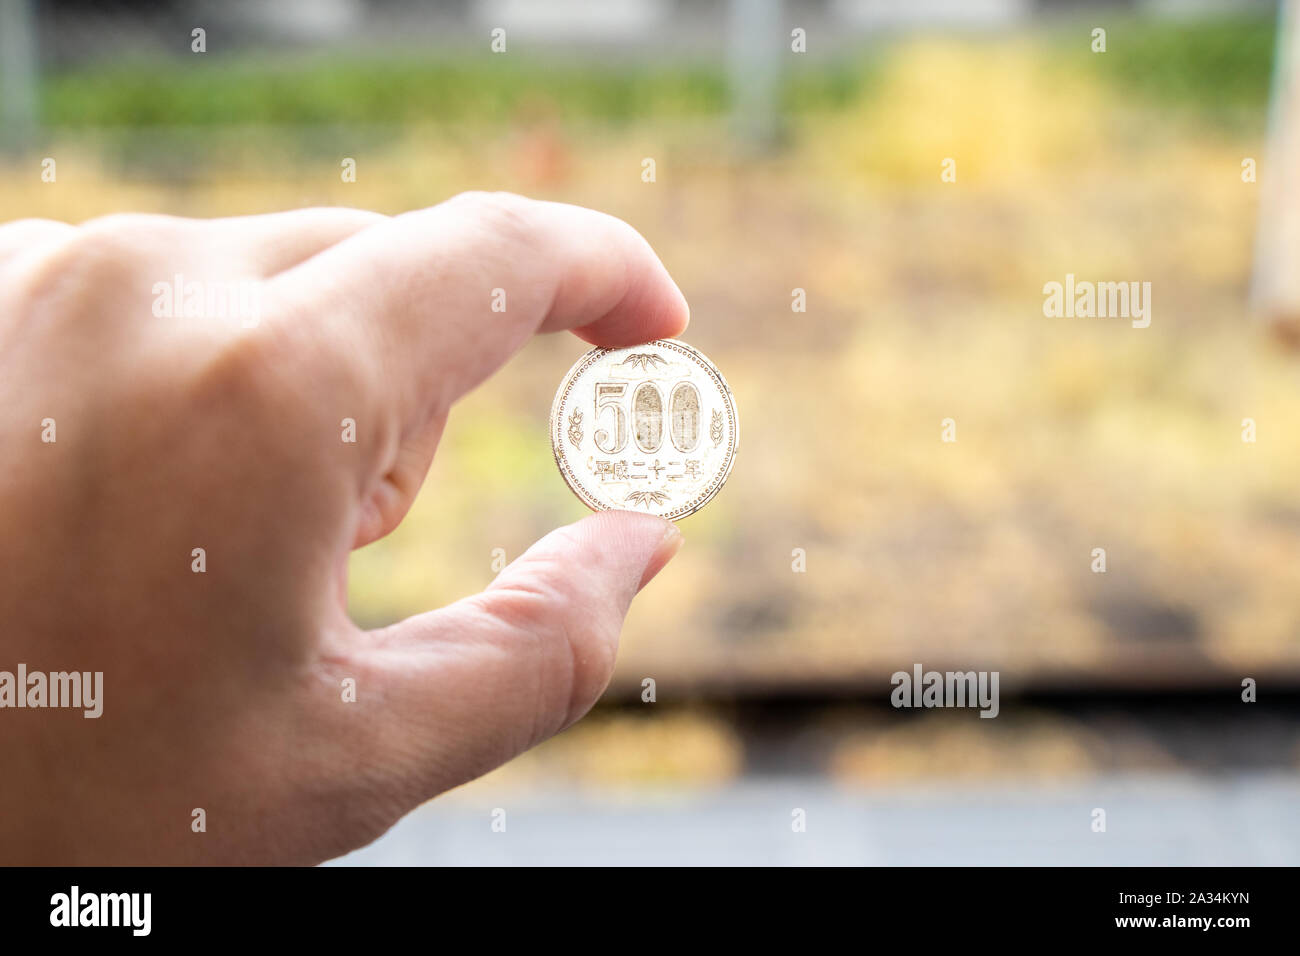 Man hold japanese coin 500 yen on blurred background Stock Photo